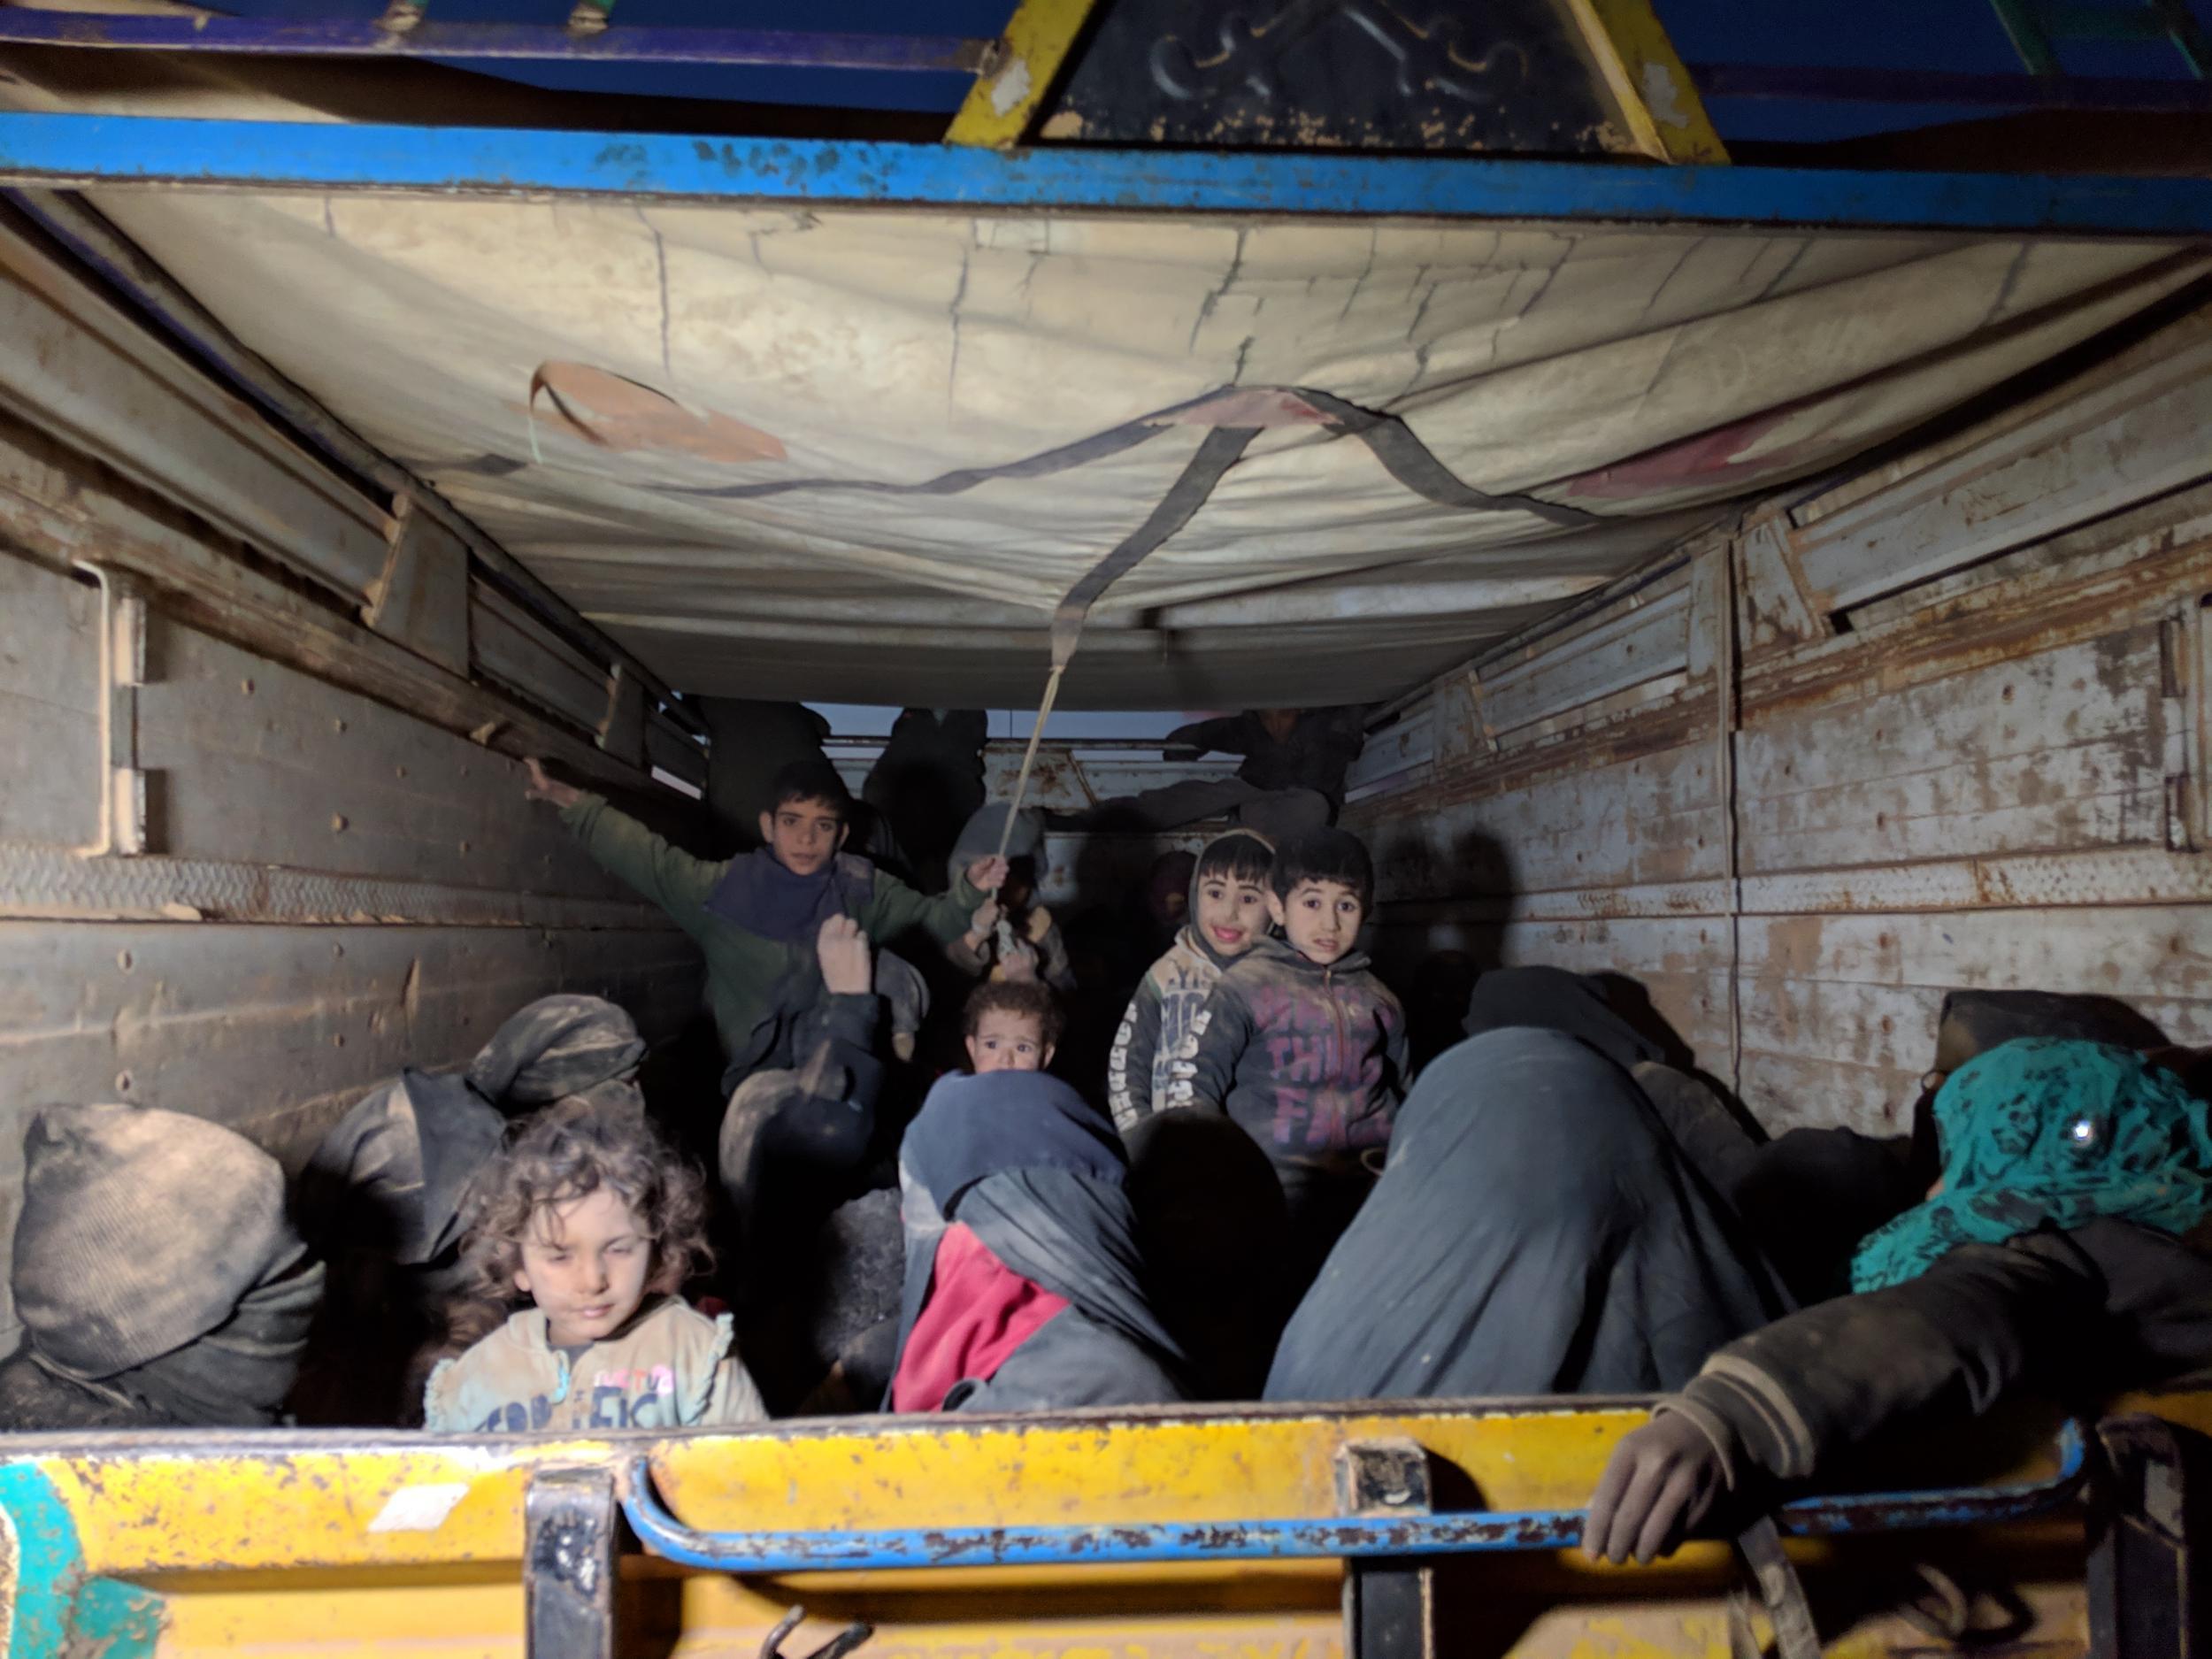 Trucks full of women and children arrive from the last Isis-held areas